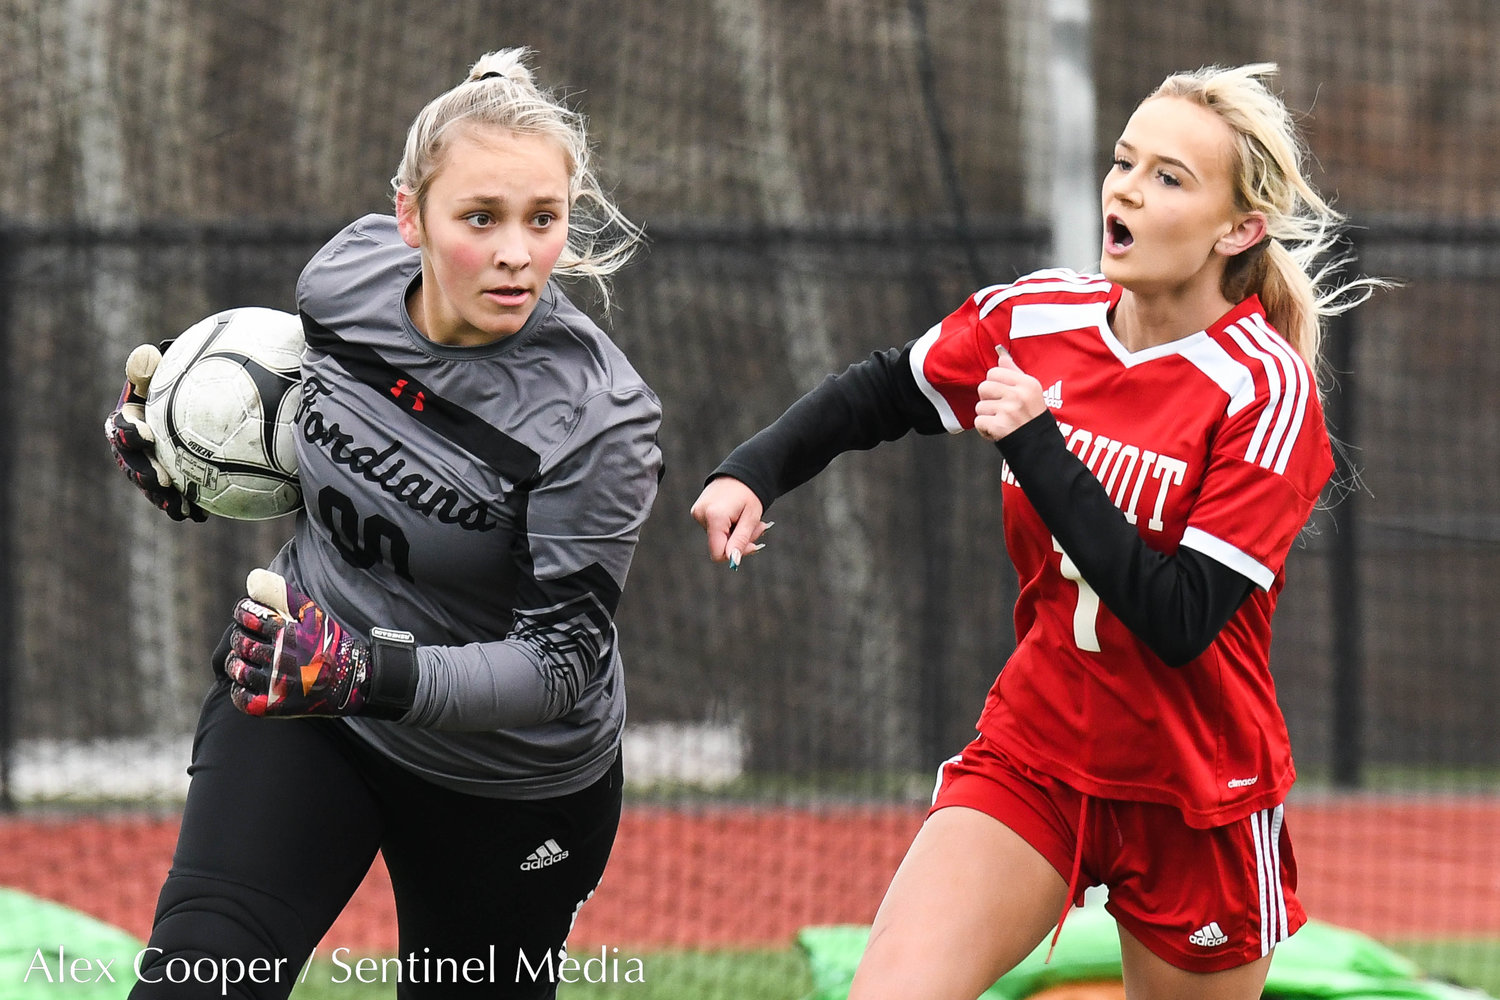 Sauquoit Valley player Paige Kuhn, right, reacts after Waterford-Halfmoon goalie Maddy Atwood makes a save during the Class C state final on Sunday at Cortland High School. The Indians lost 6-3.